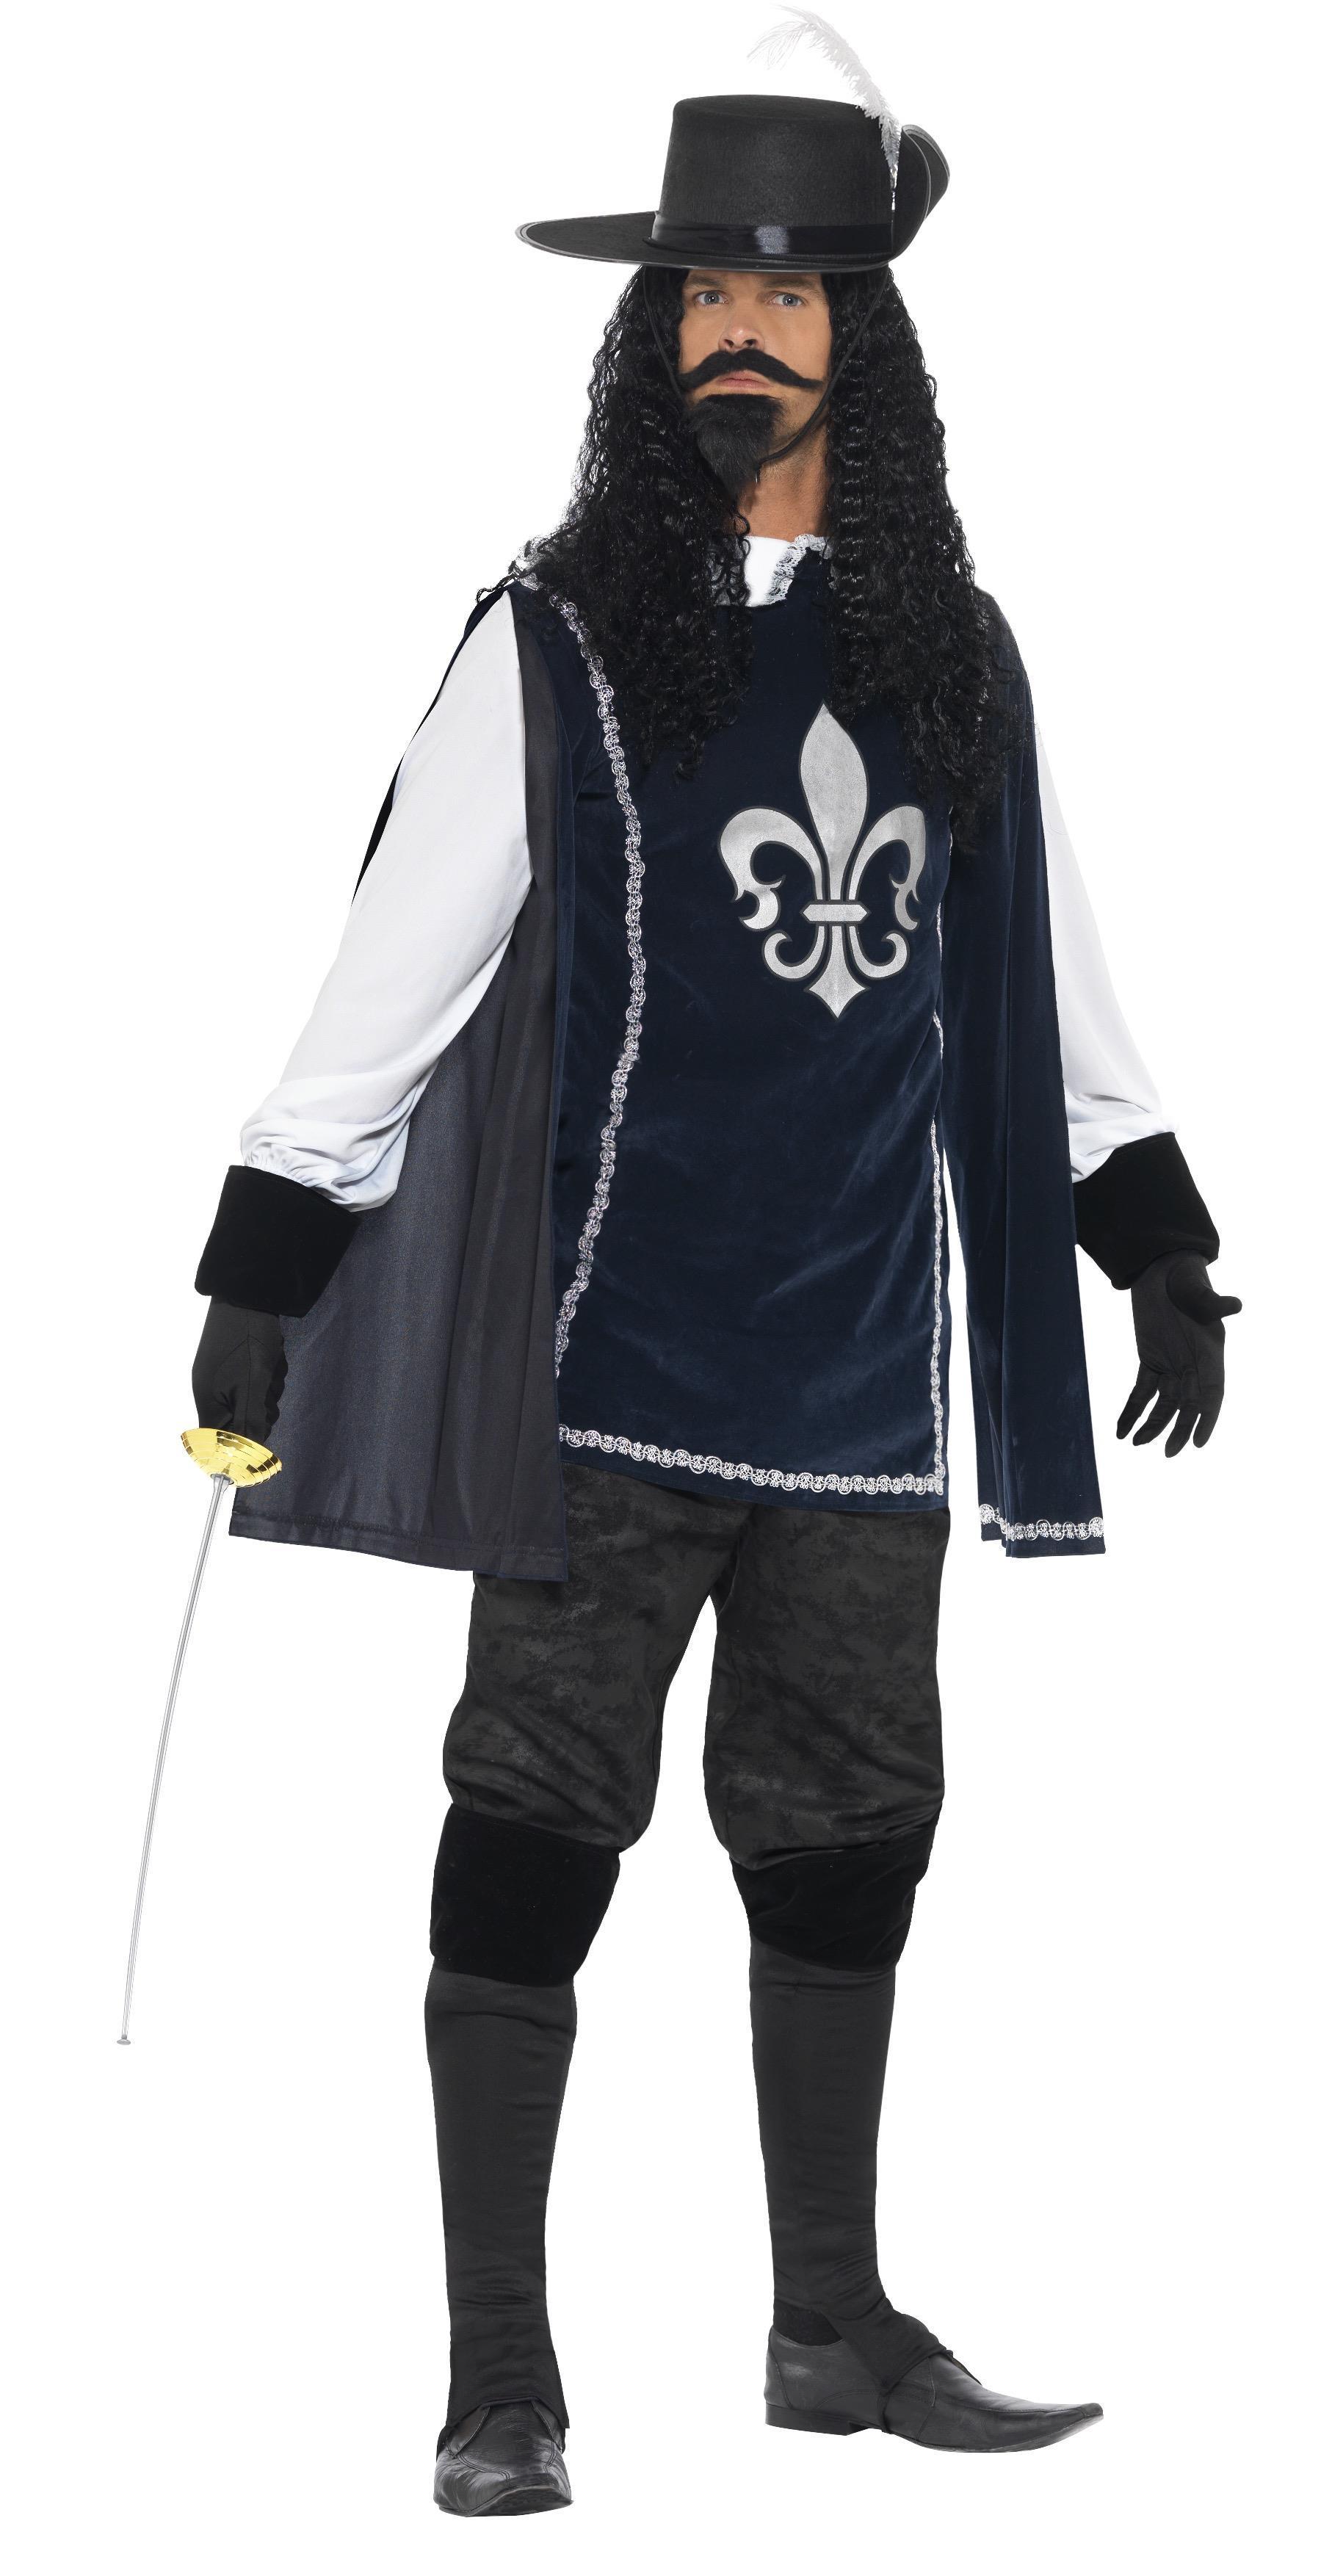 Musketeer Male Costume